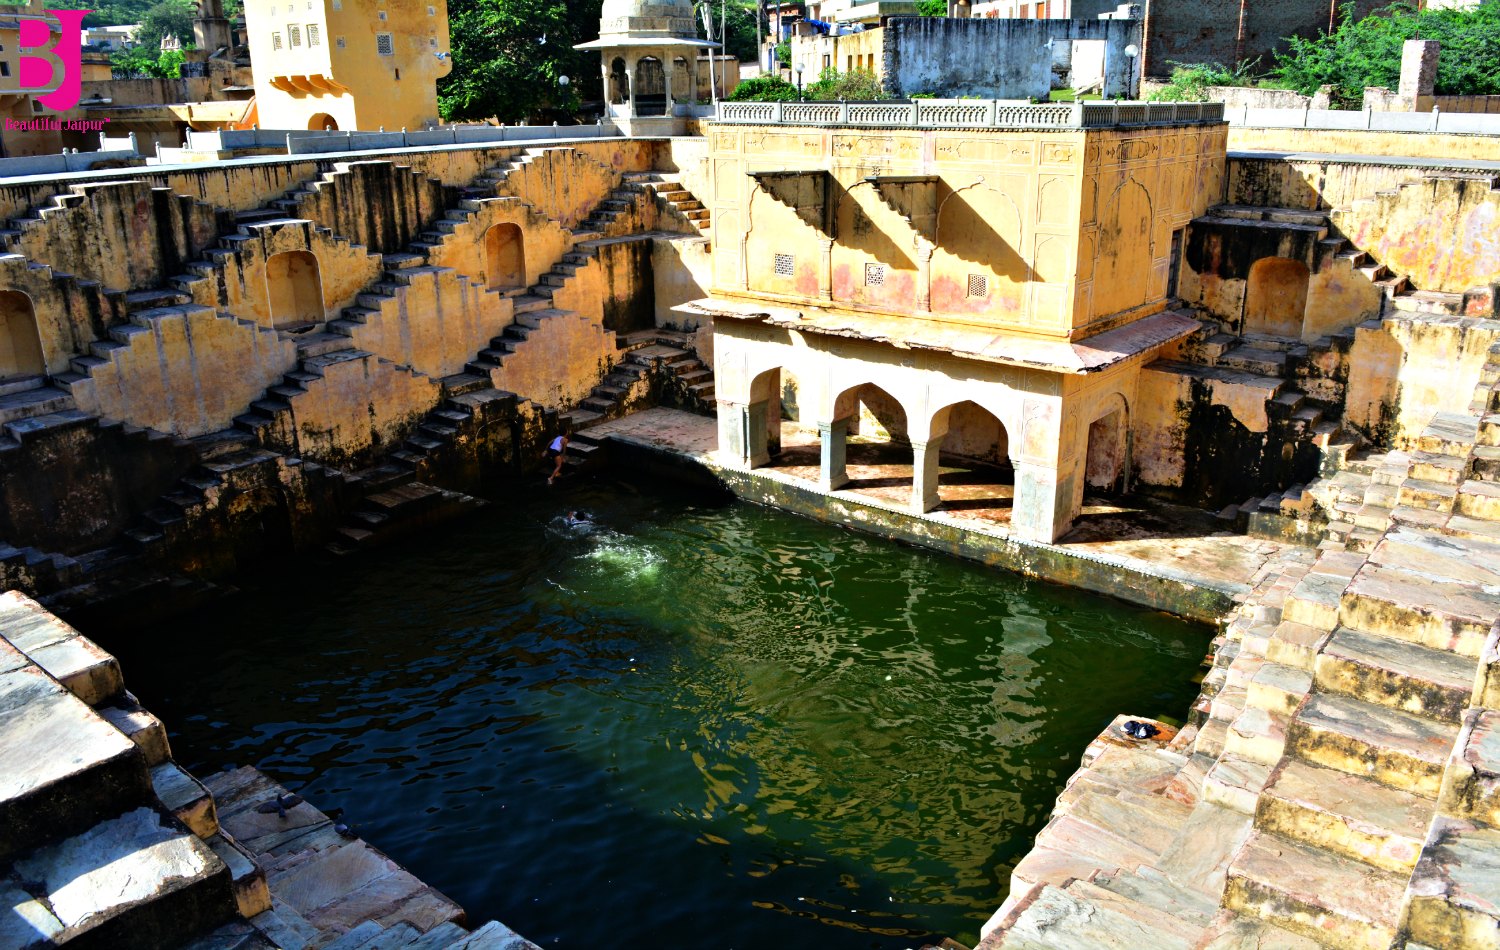 Yep, people can swim in there. Img from Beautiful Jaipur.